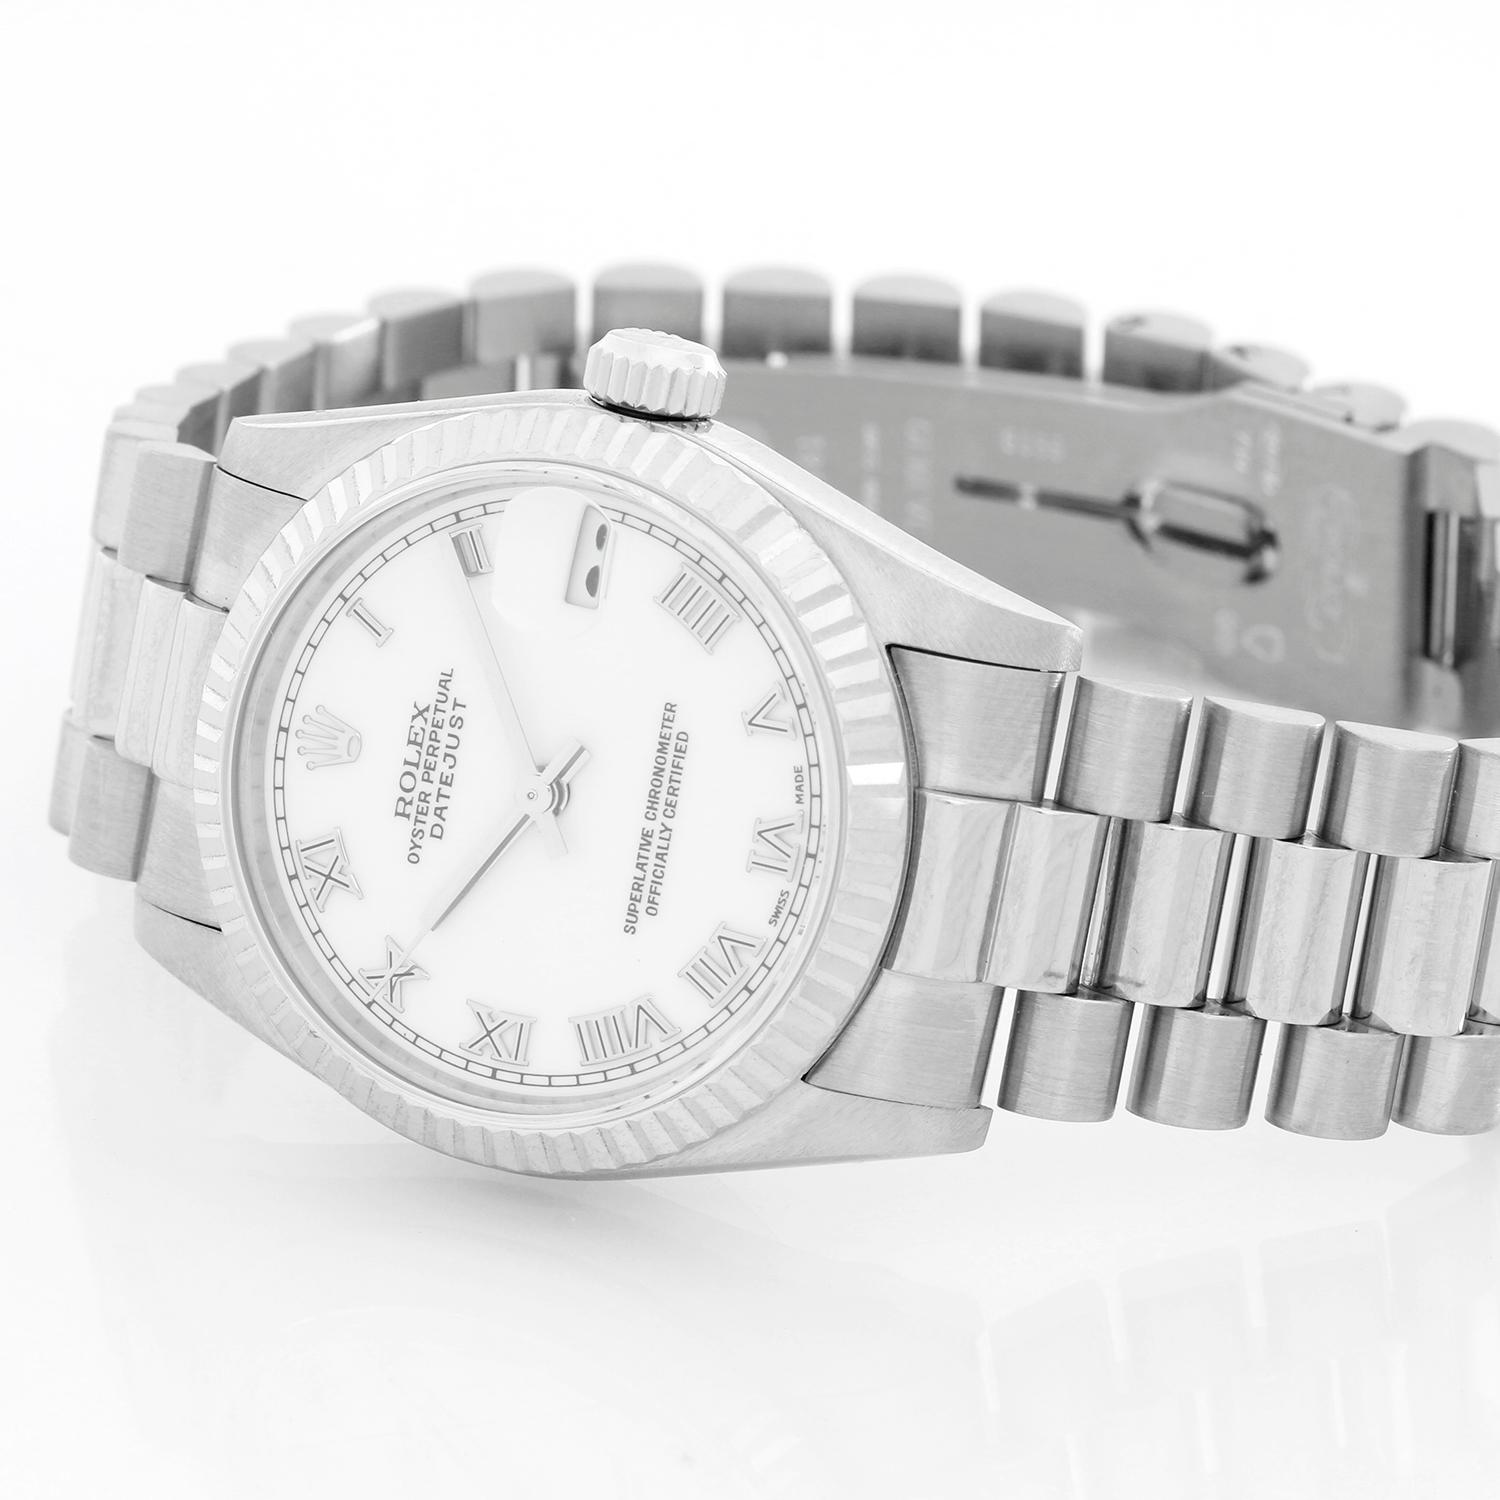 Rolex Oyster Perpetual 18k White Gold Midsize  Watch 68279 - Automatic winding, 29 jewels, Quickset date, sapphire crystal. 18k white gold with fluted bezel ( 30 mm ). White dial with raised Roman numerals. White gold President bracelet. Pre-owned